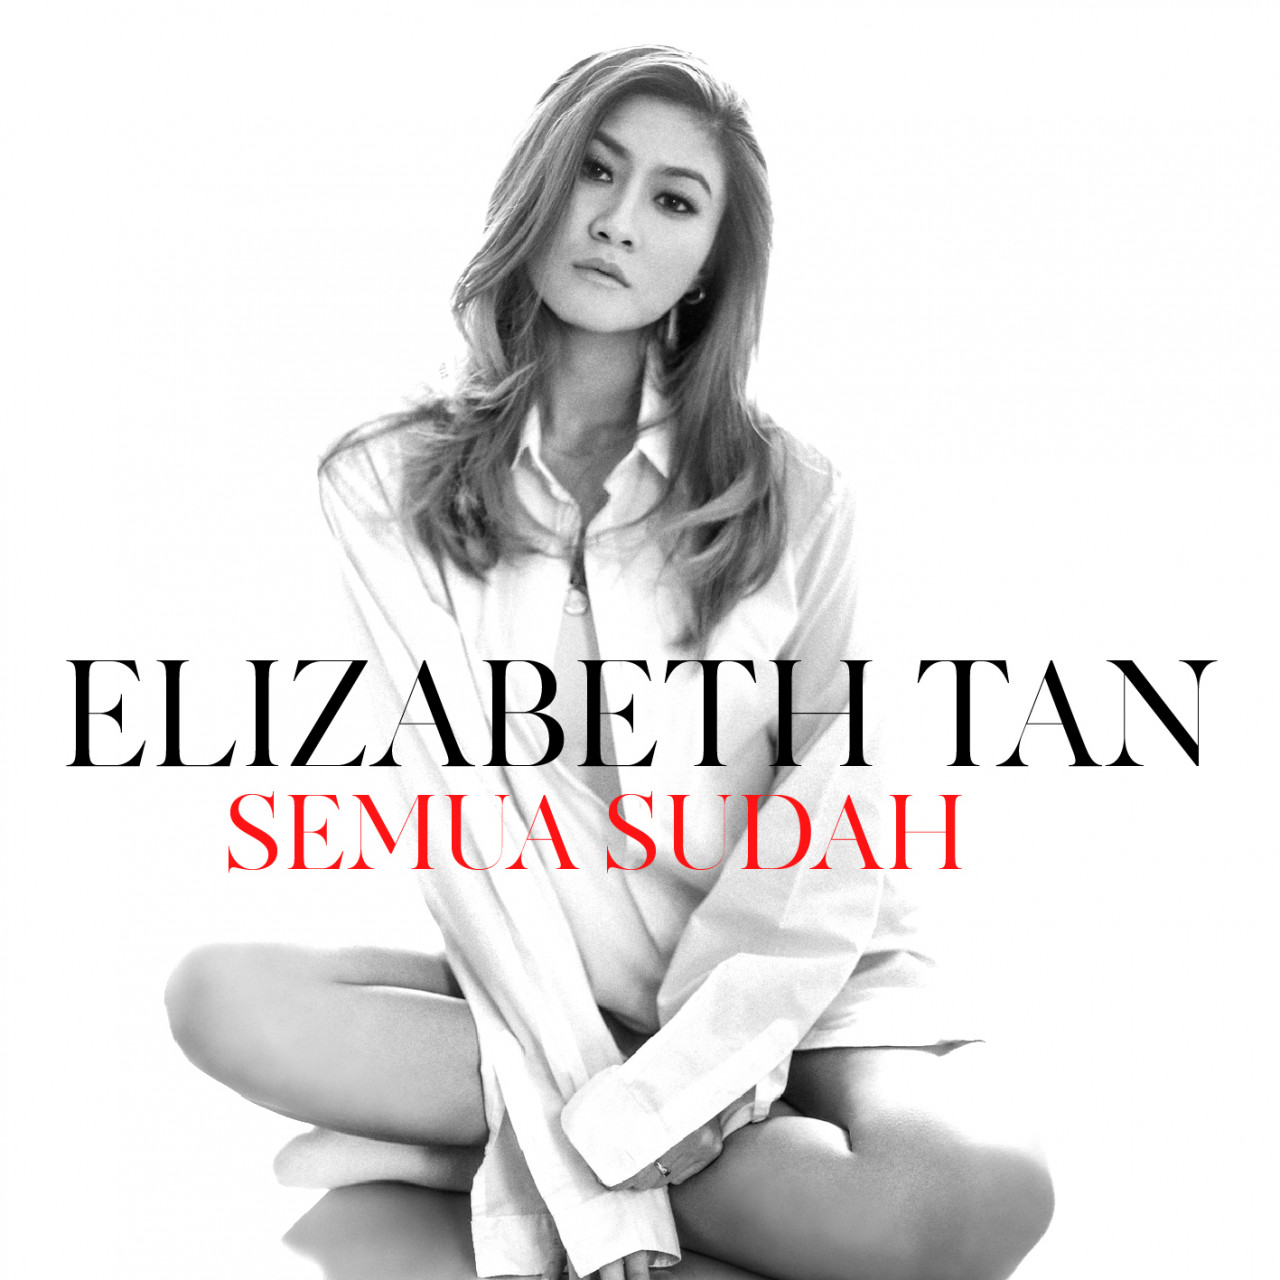 Singer, model, actress Elizabeth Tan on the cover of her single released in 2008. – Pic courtesy of Warner Music Malaysia